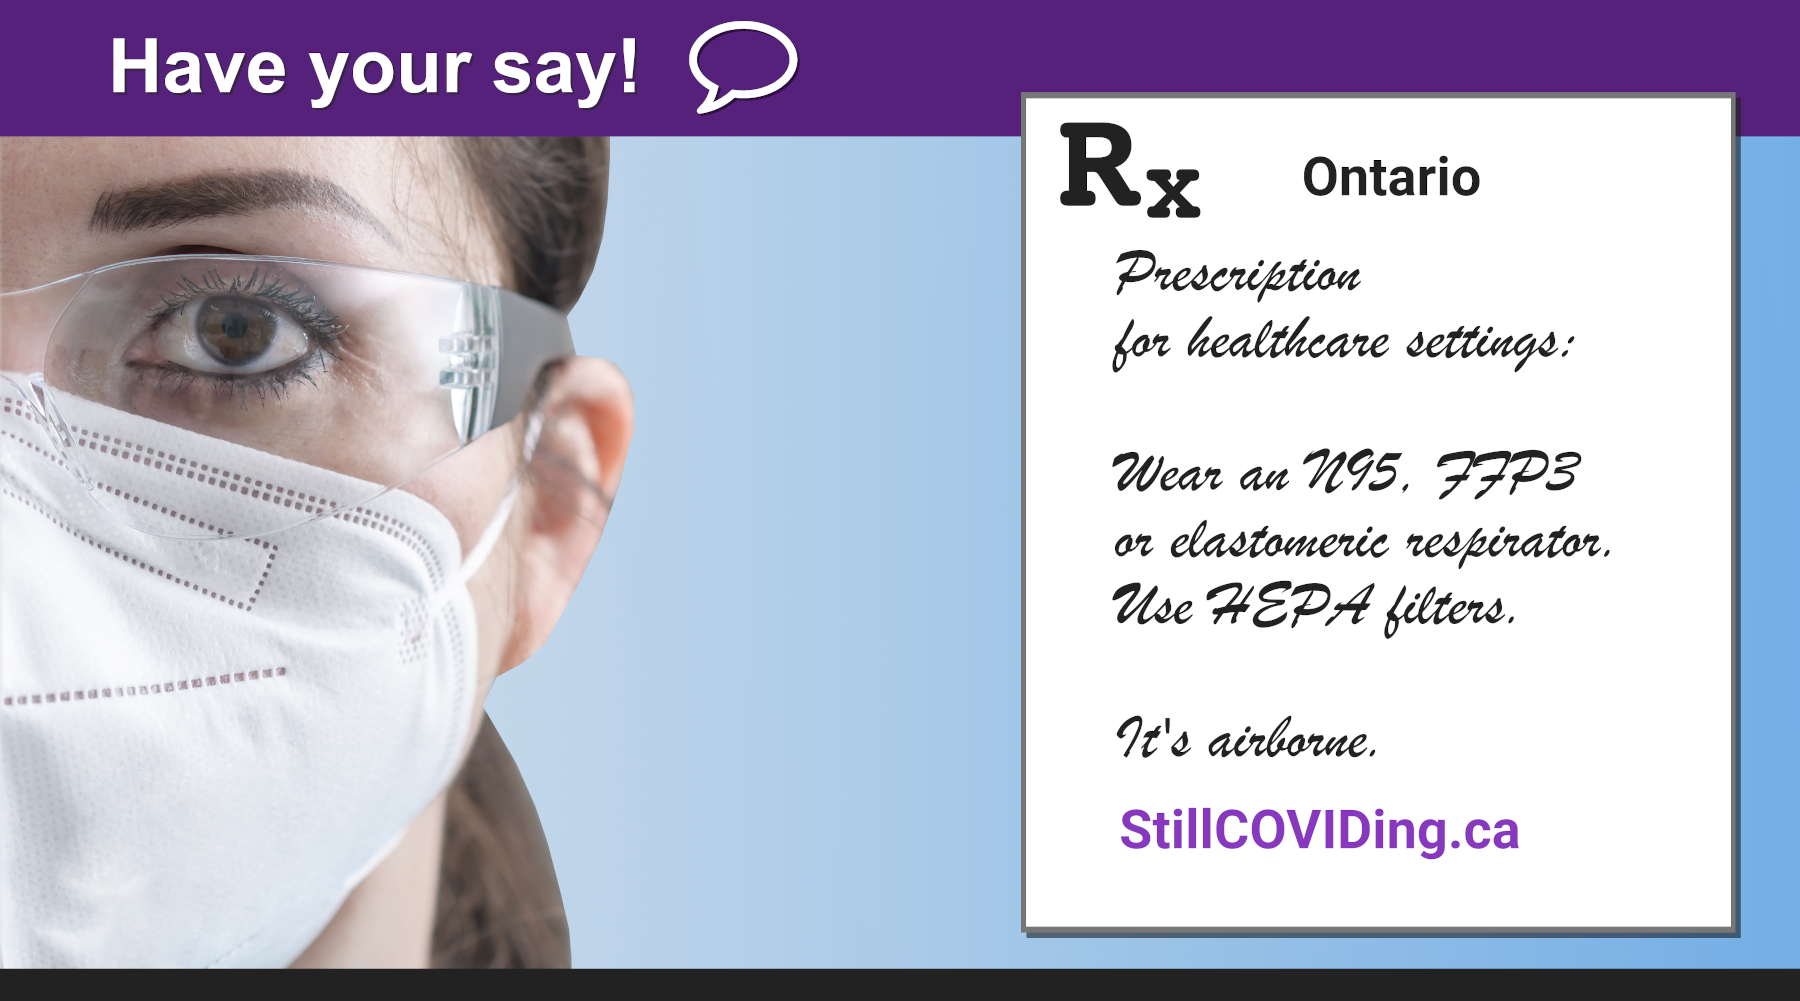 Image description: Photo of a healthcare worker with long brown hair, who is wearing a white respirator and glasses. To the right, there is some black text reading: Rx Prescription for healthcare settings: Wear an N95, FFP3 or elastomeric respirator. Use HEPA filters. It’s airborne. StillCOVIDing.ca